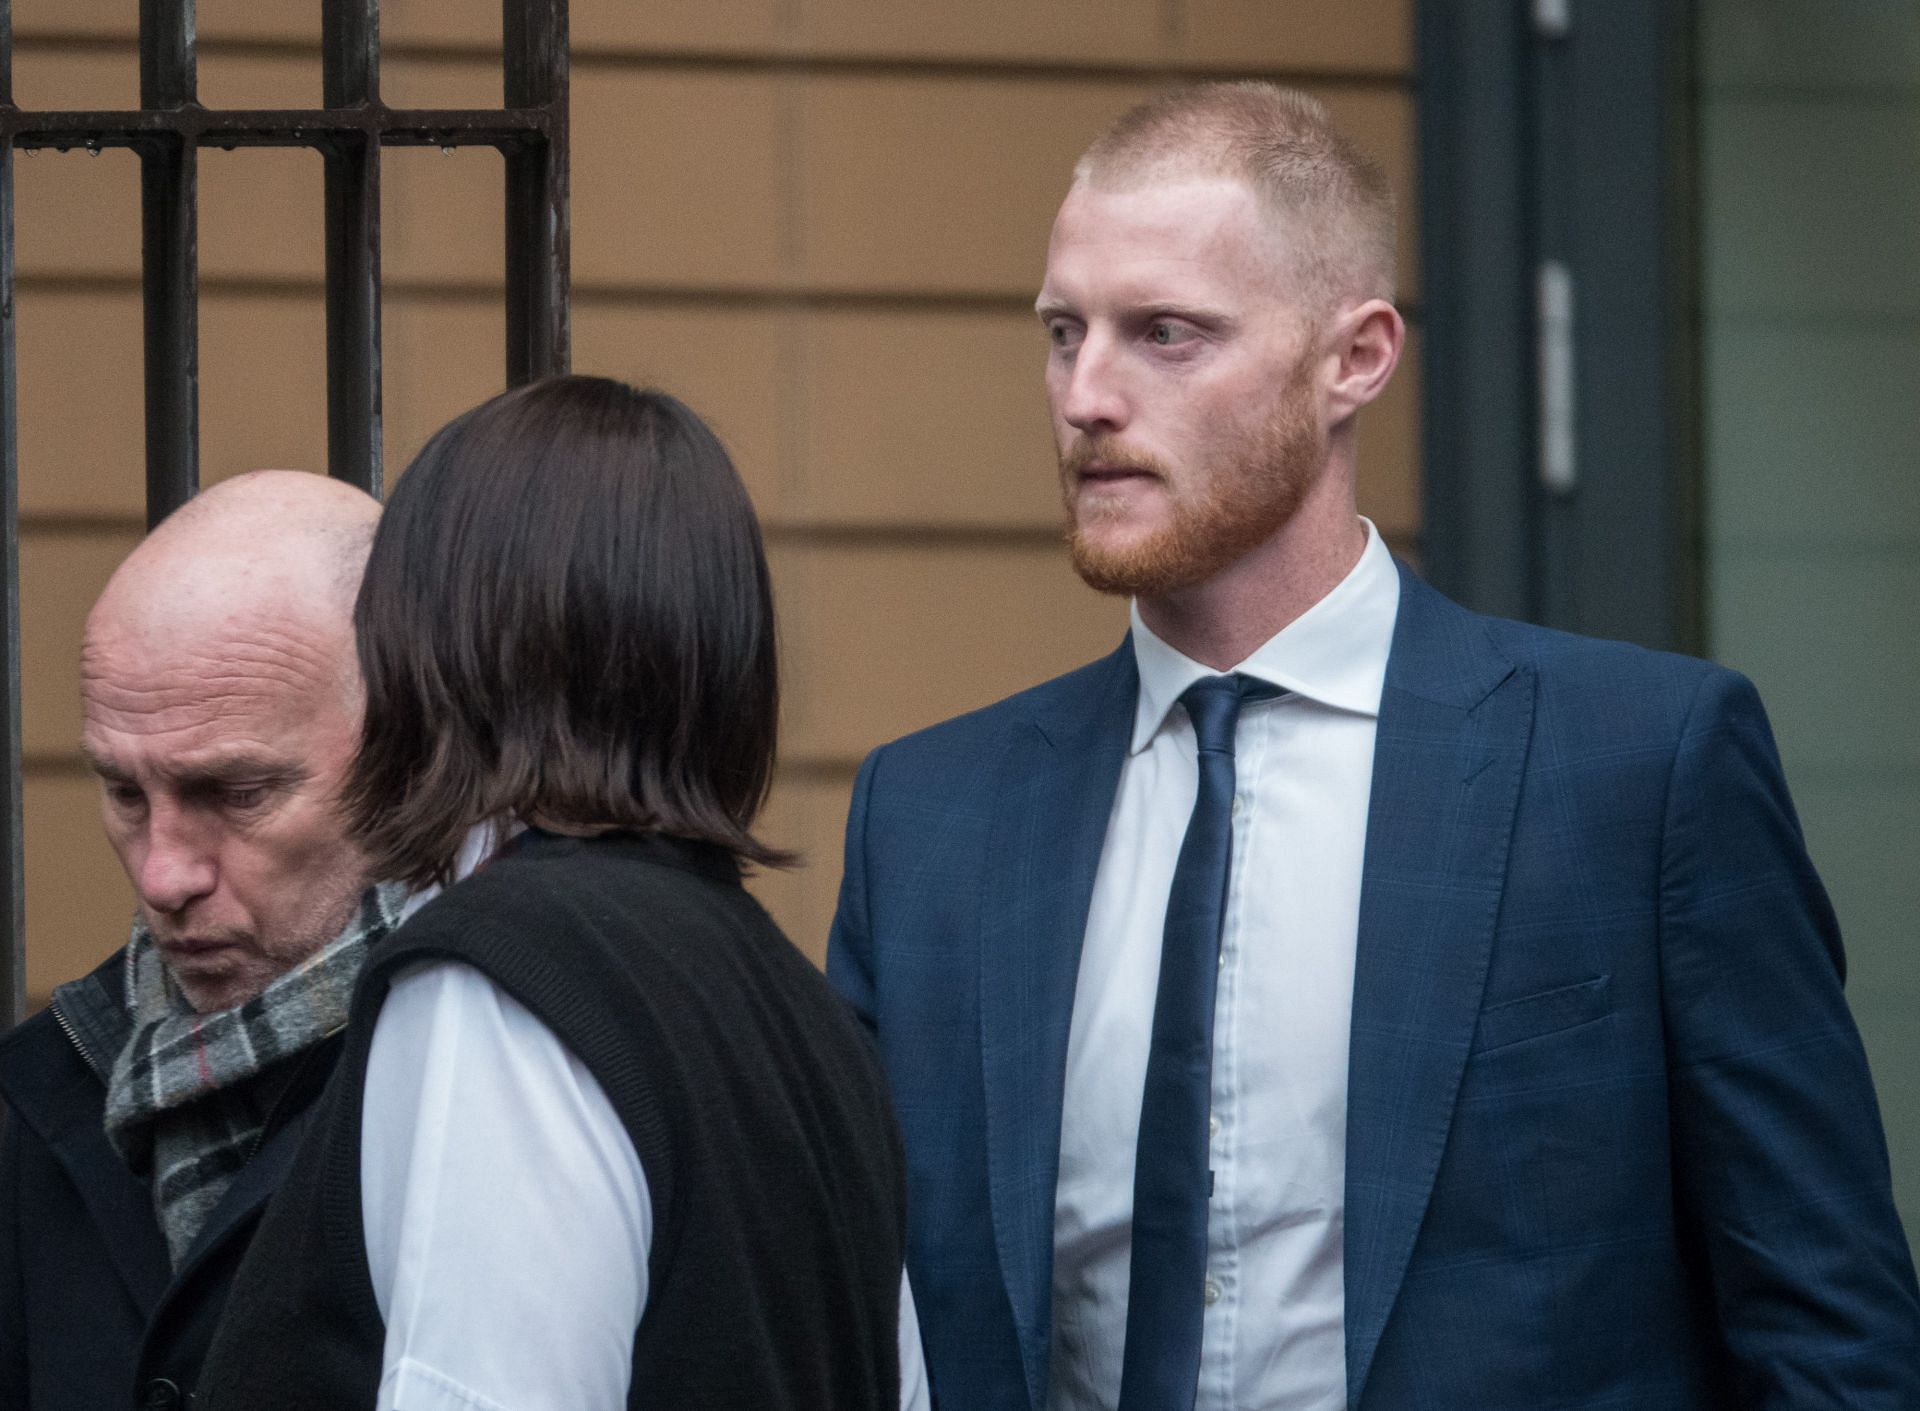 England Cricketer Ben Stokes On Trial For Affray (Image: Getty)